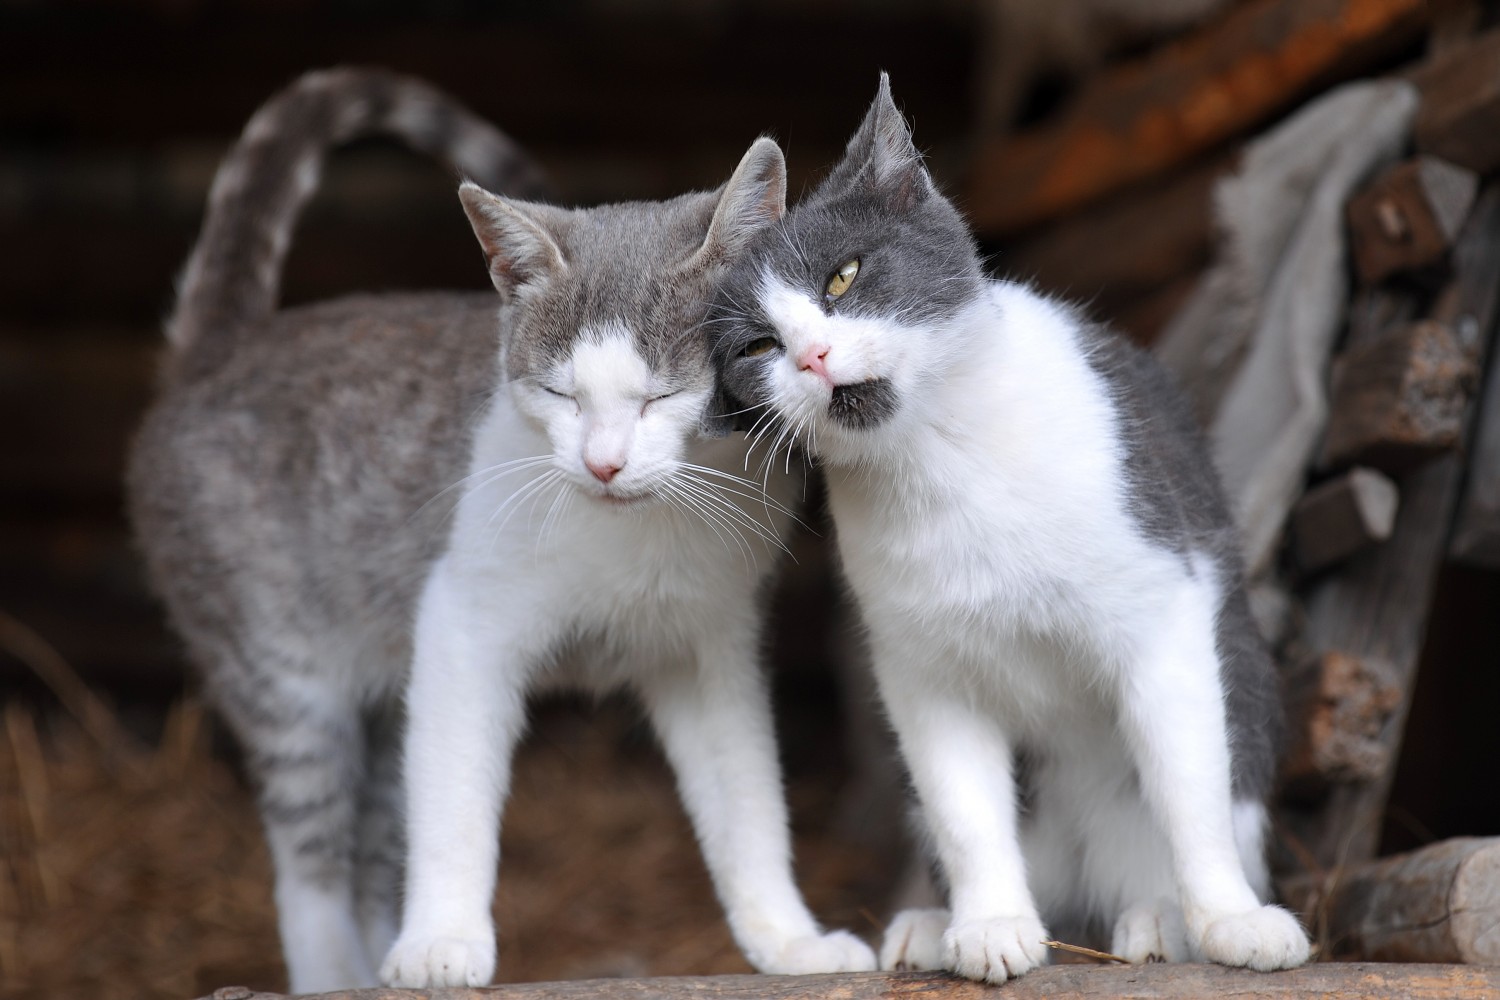 Two cats in a barn